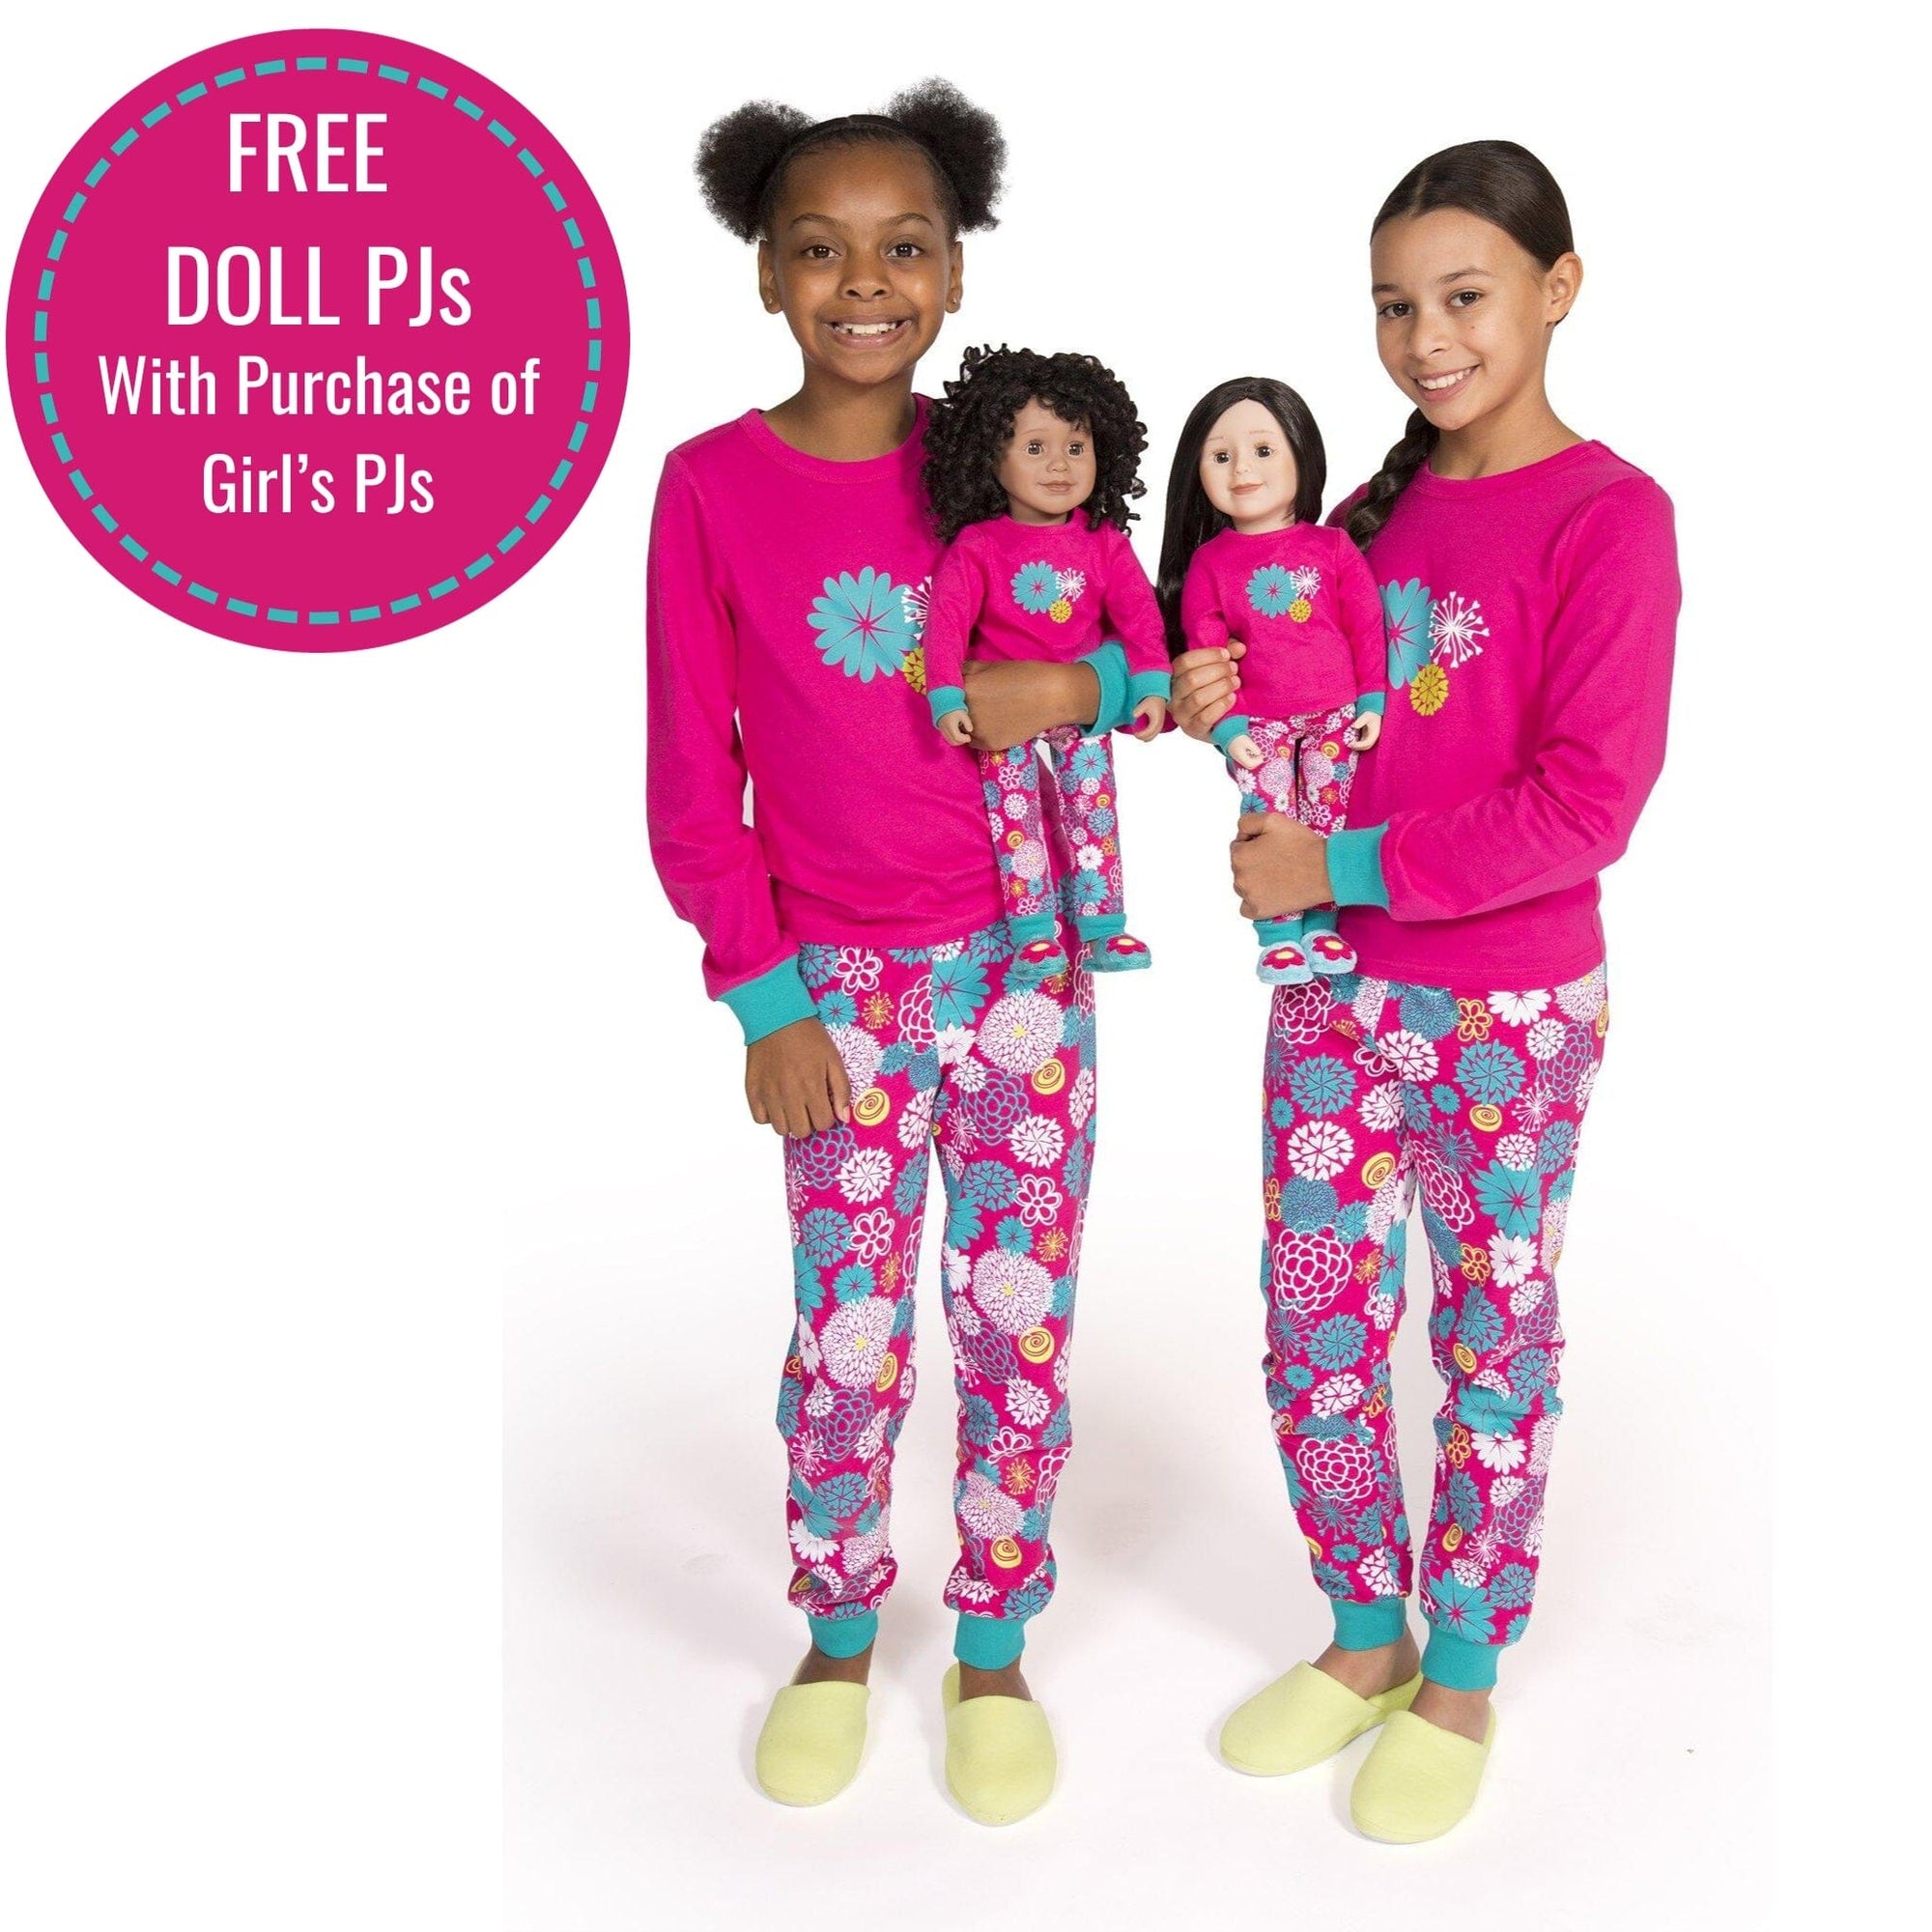 Matching Pajamas for Dolls and Girls, 6 Styles Available